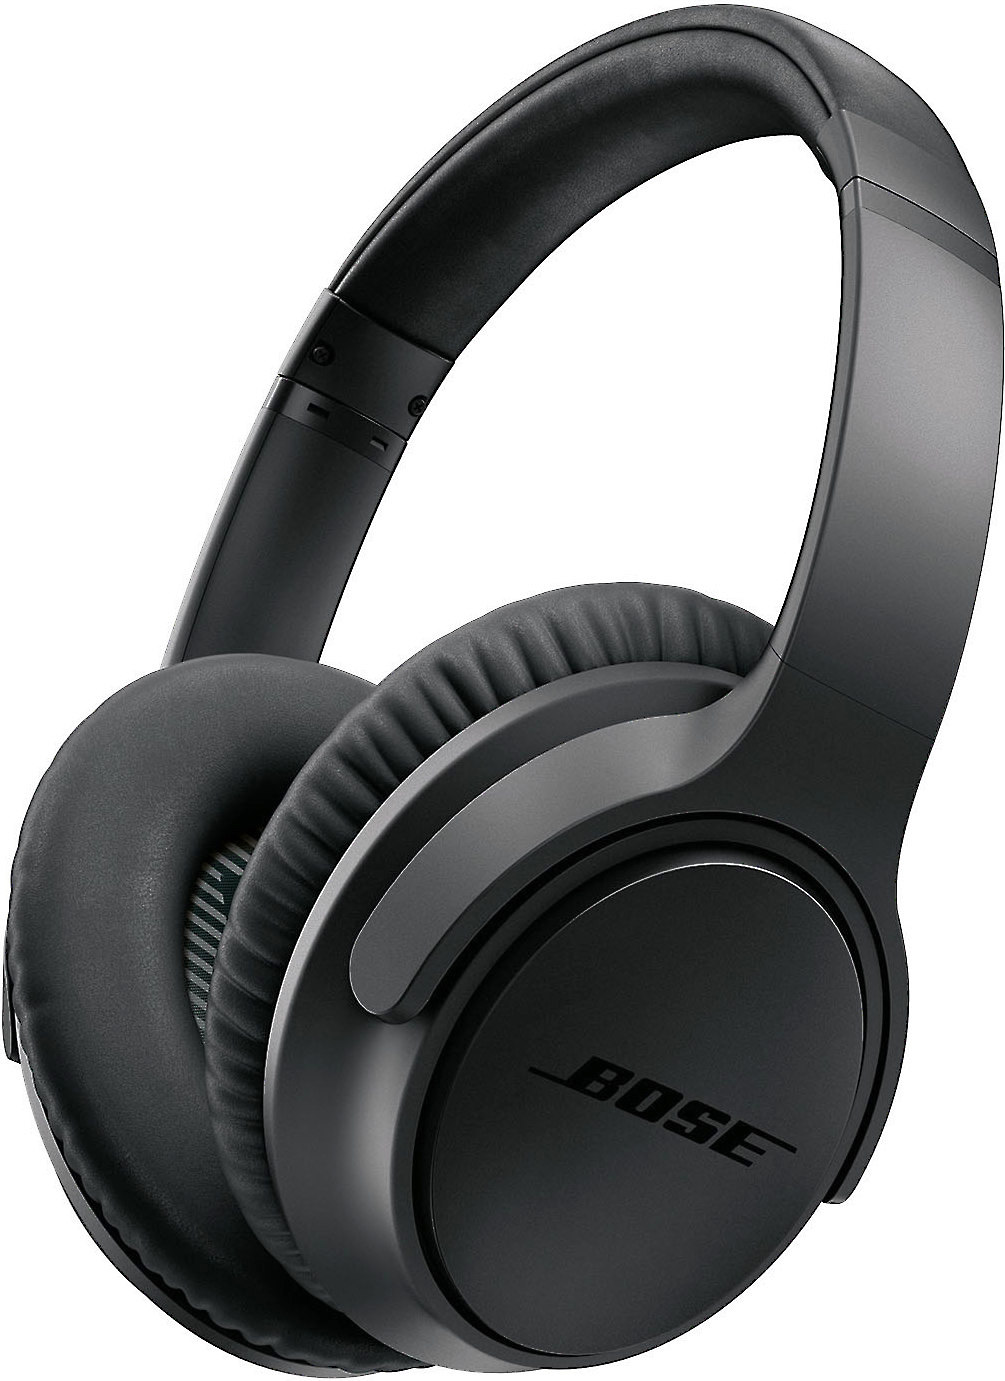 Bose Soundtrue Around Ear Headphones Ii Charcoal Black For Music And Calls With Samsung And Android Devices At Crutchfield